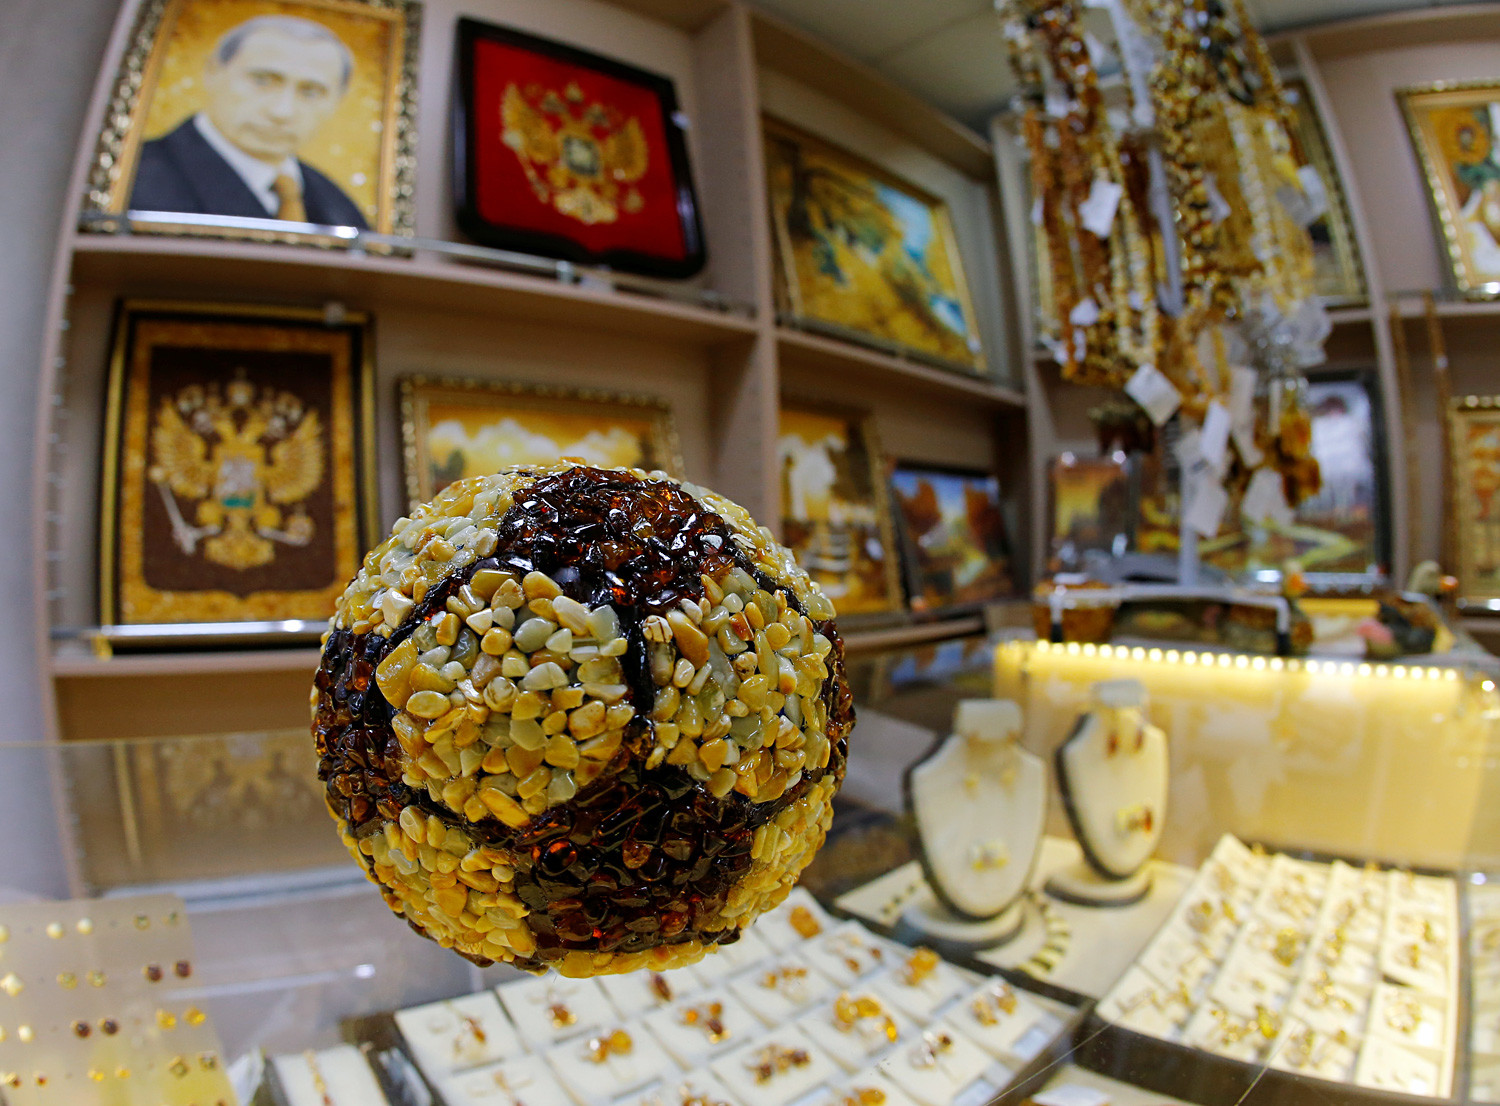 A soccer ball (yes, there’s a portrait of Vladimir Putin on the wall, also made with amber)